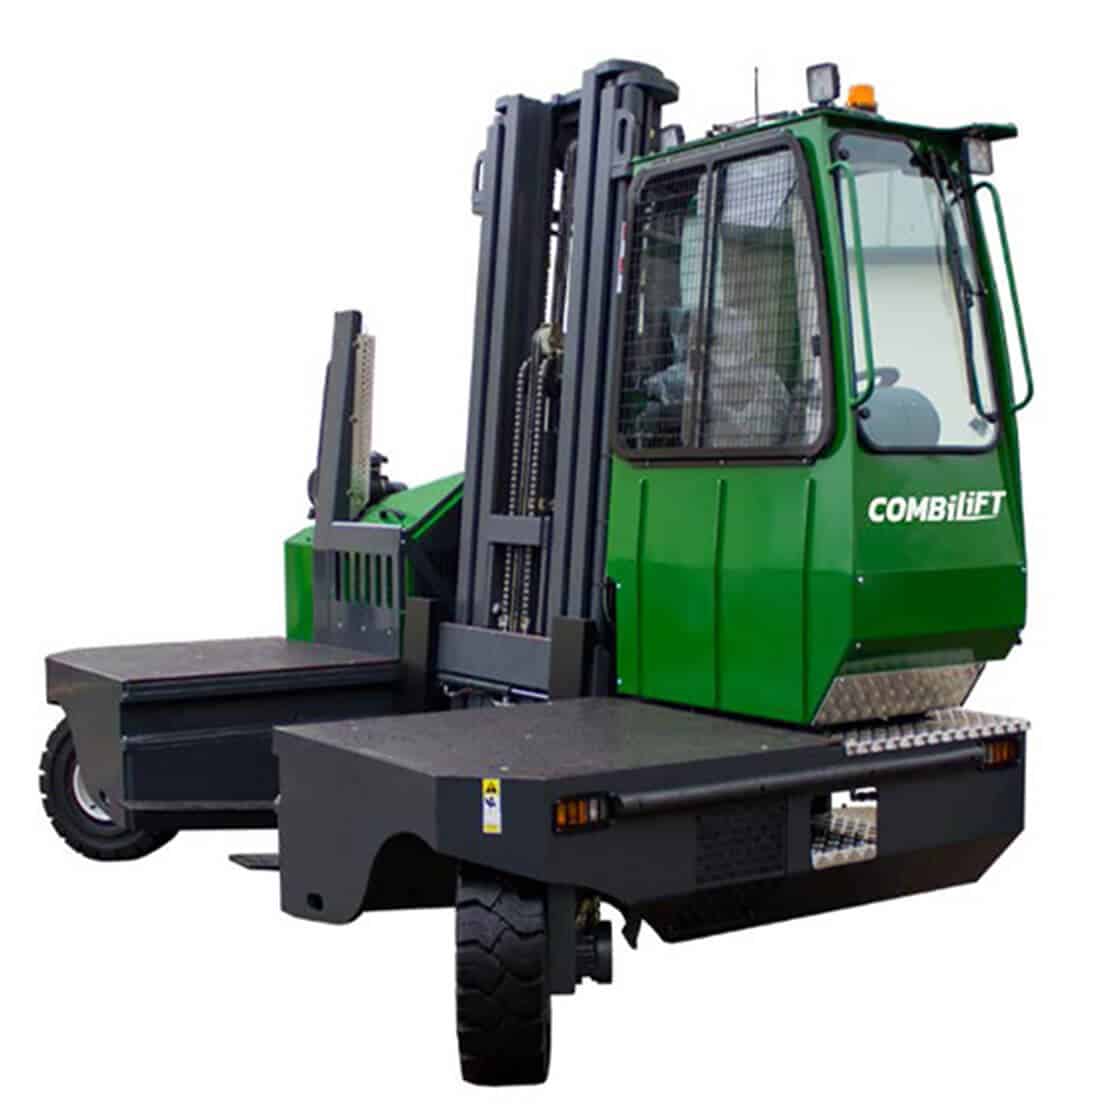 Heavy Duty Forklift Rental - High Capacity Forklifts